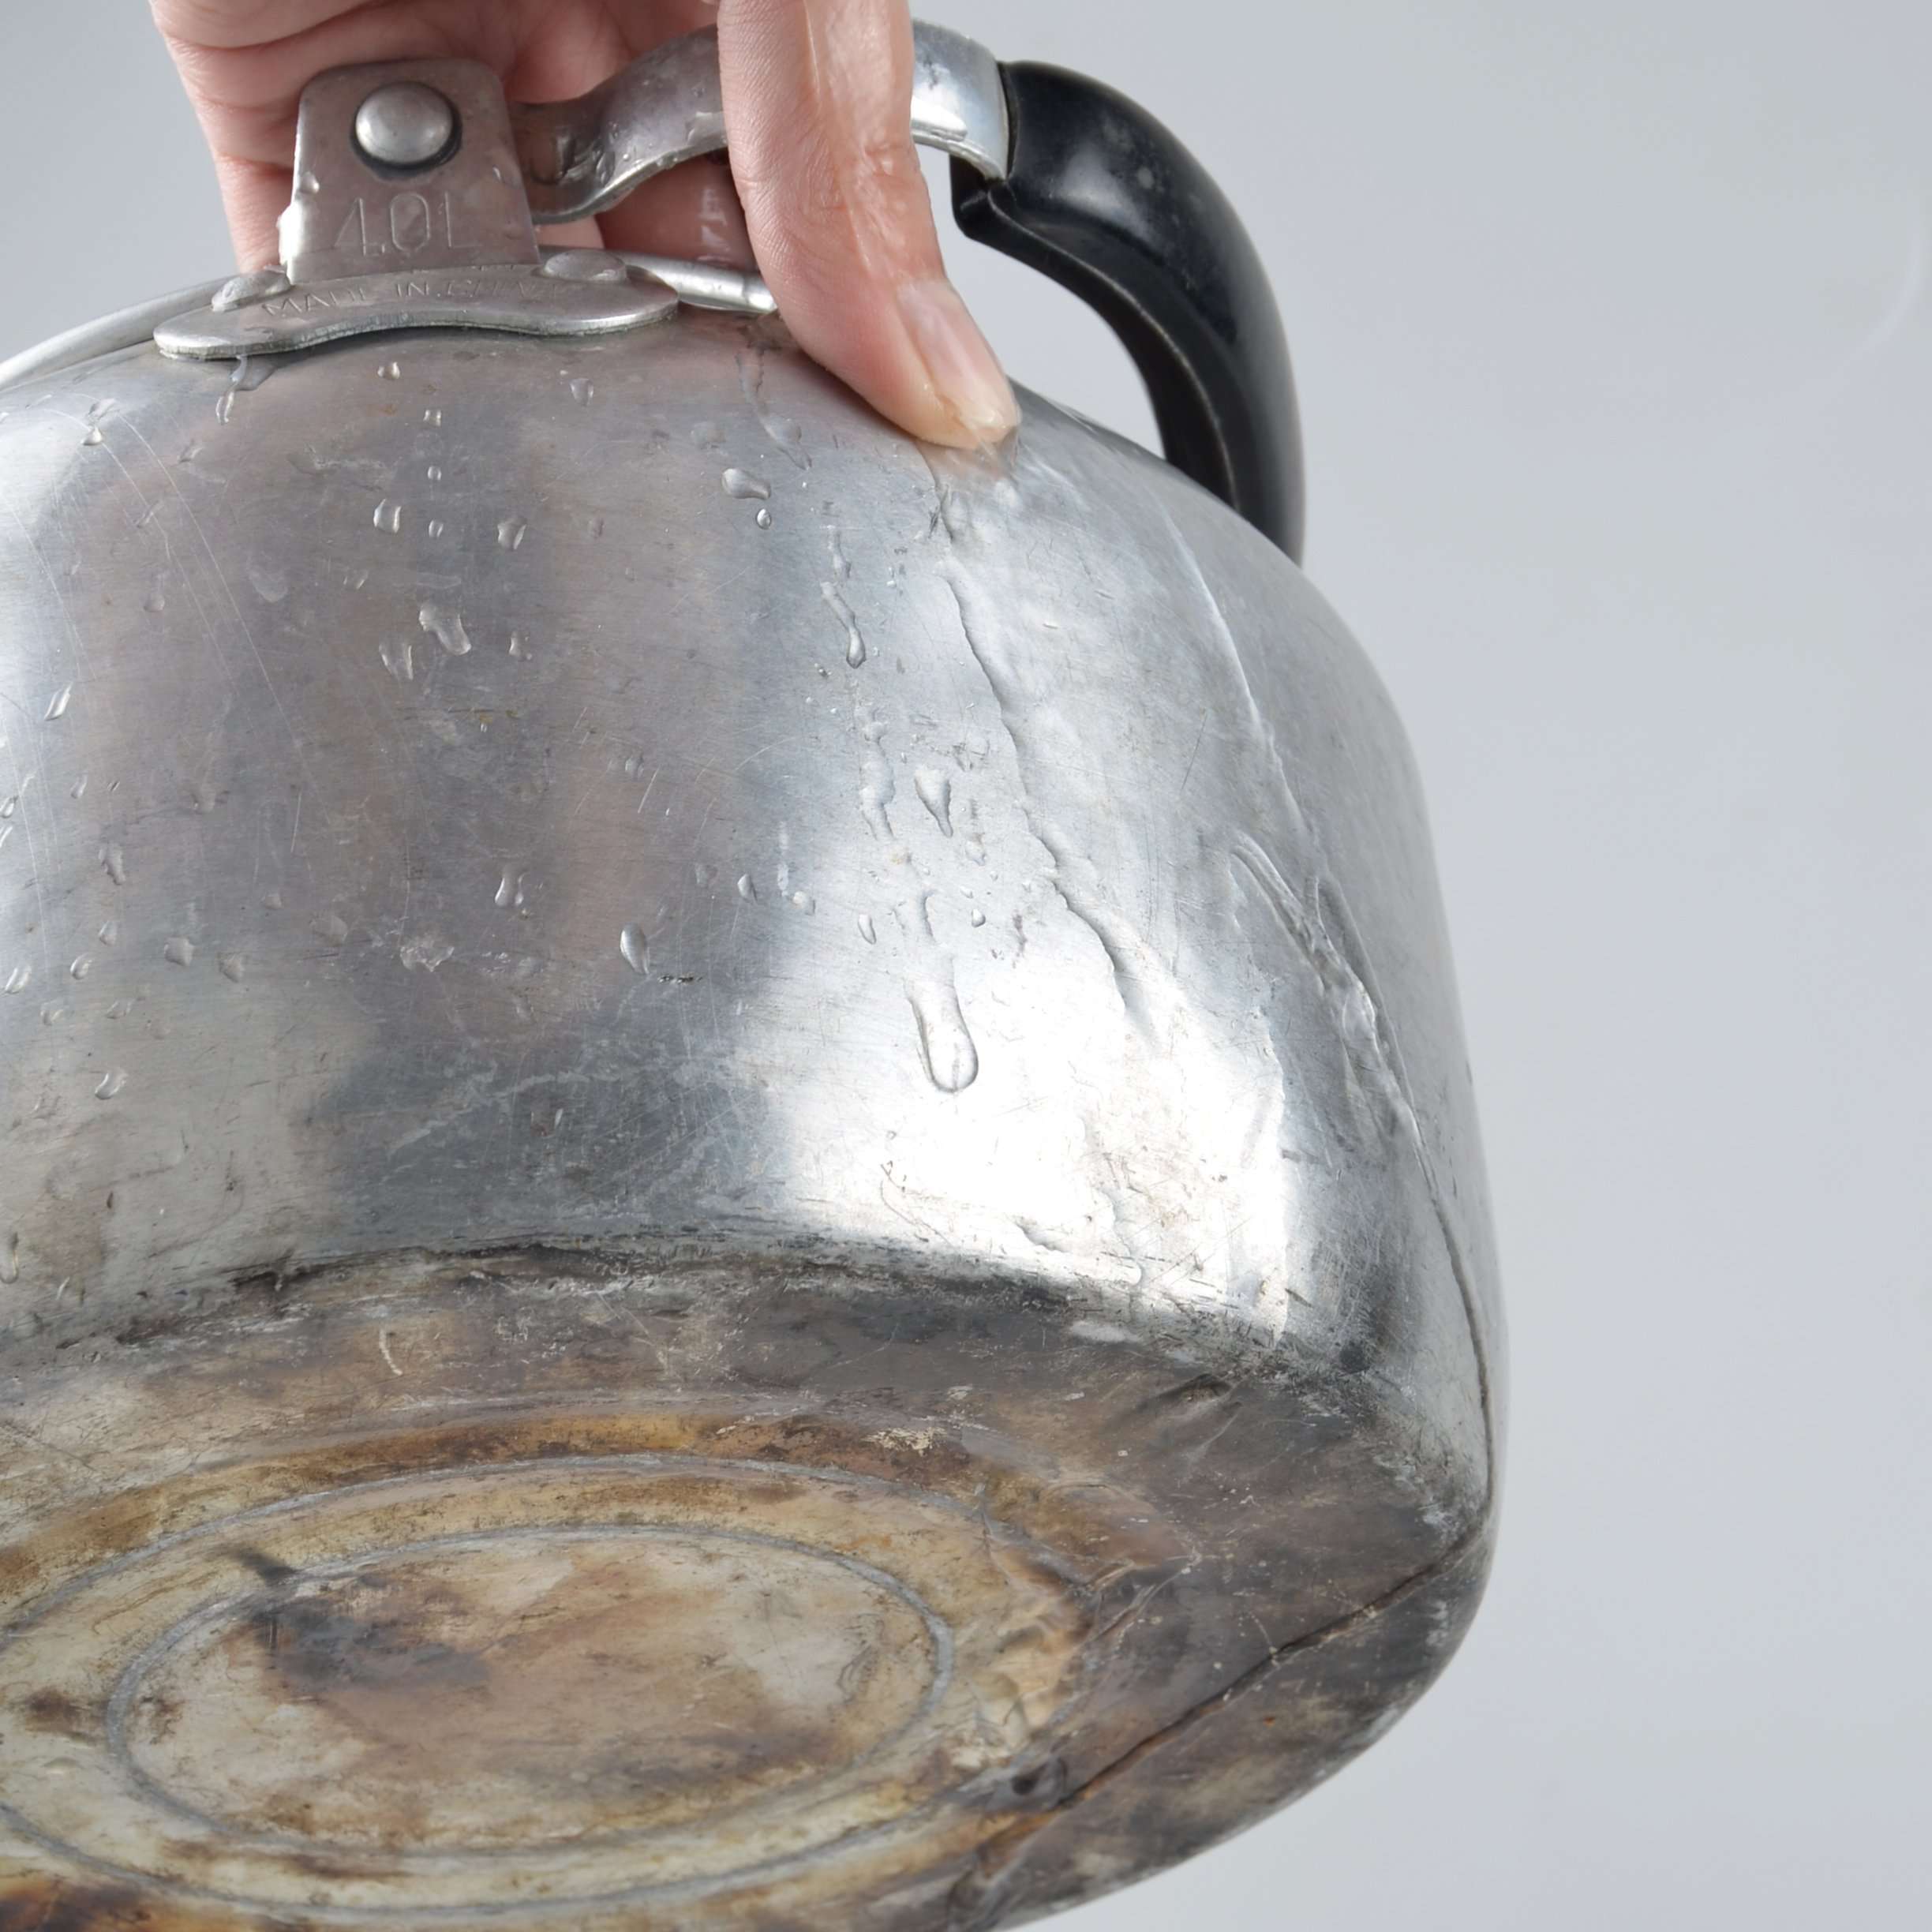 8 Ways to Remove Coffee Stains from a Stainless Steel Pot